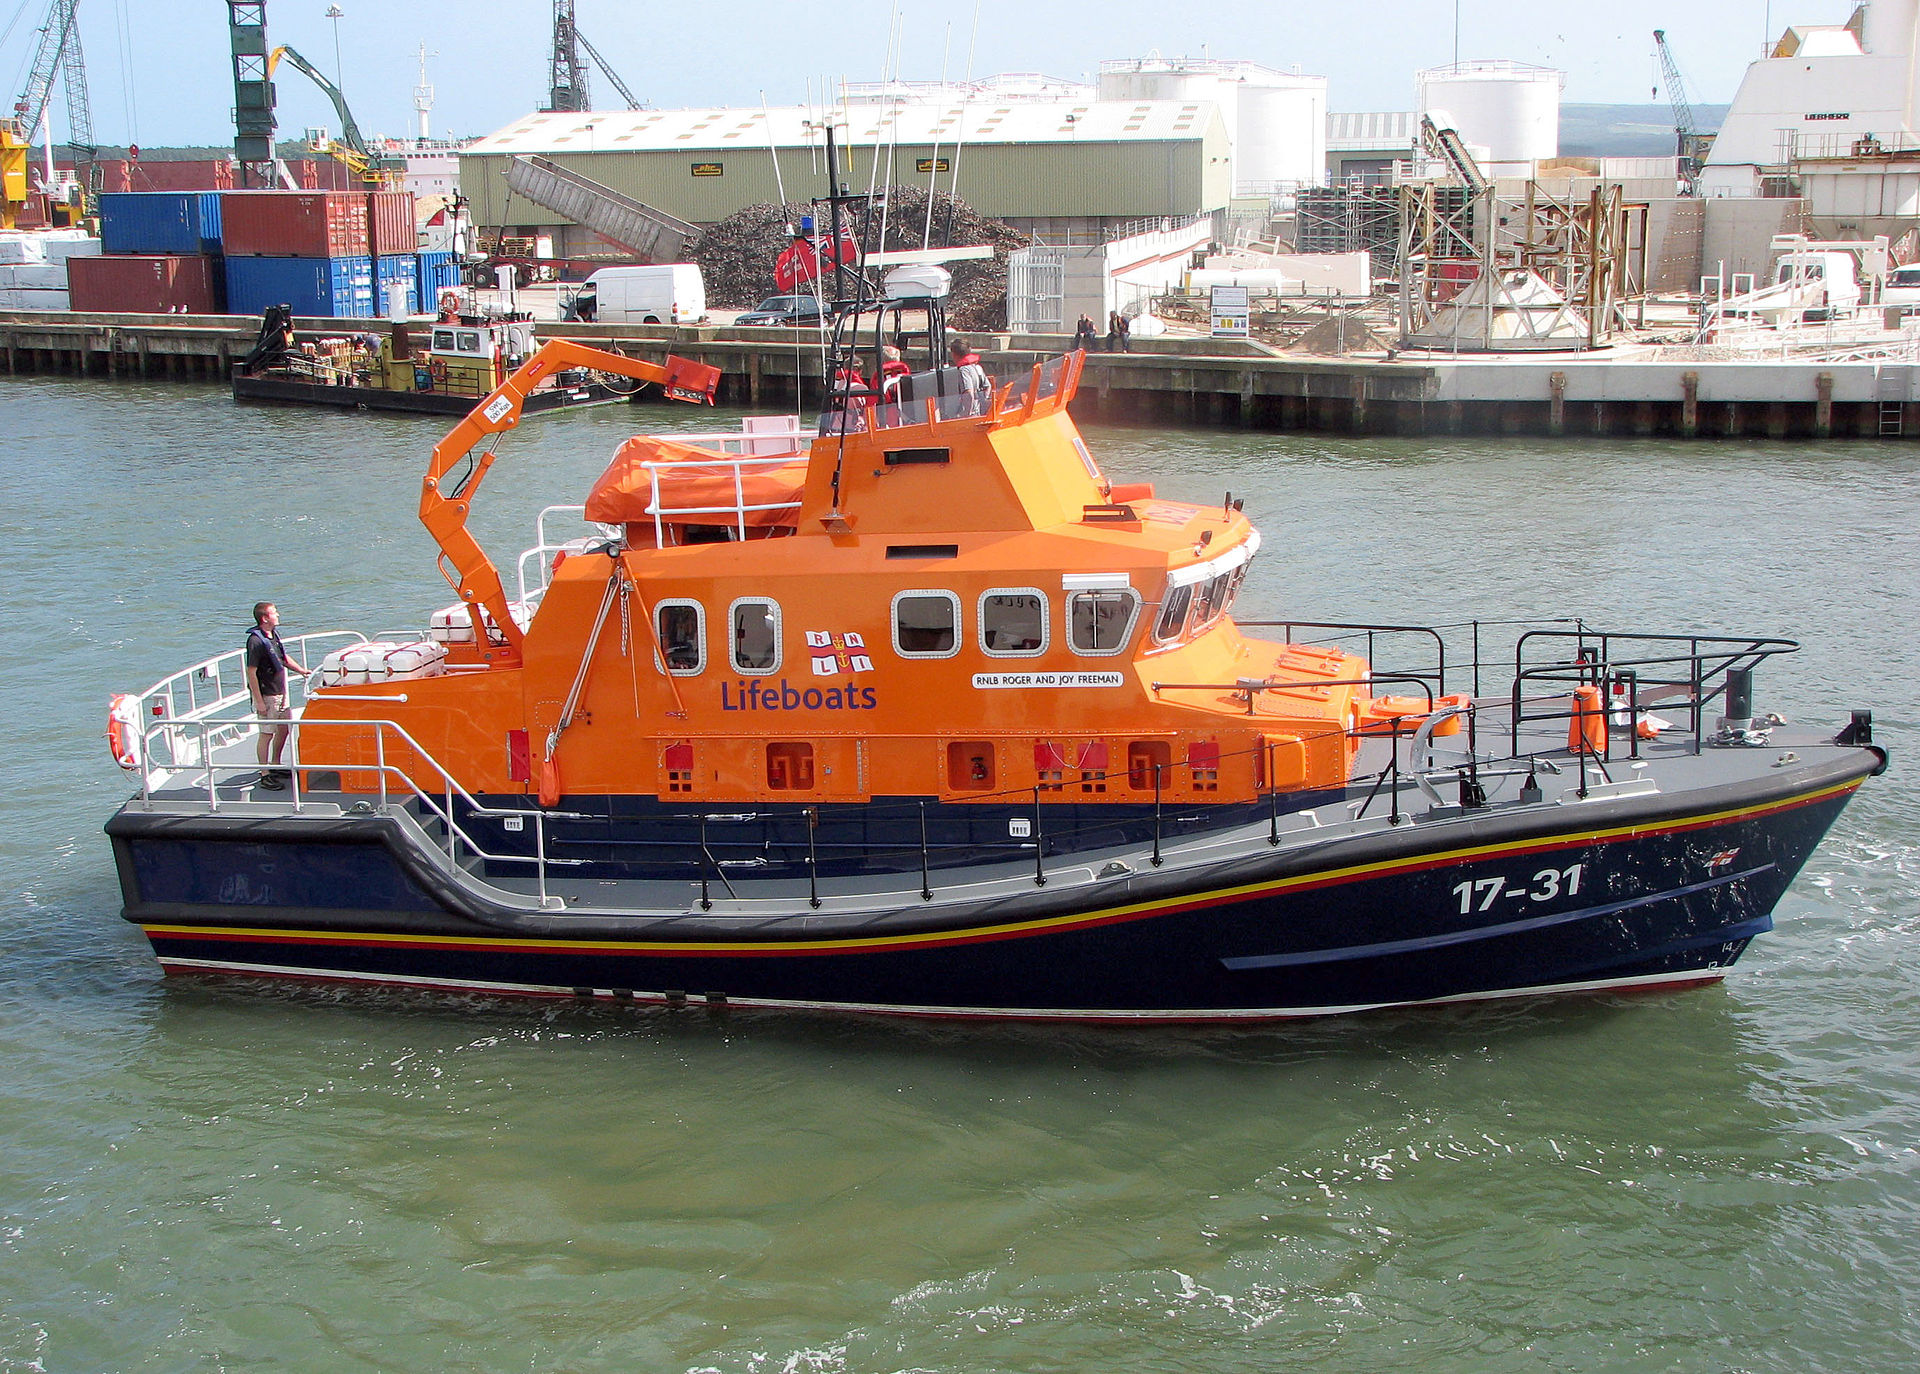 RNLI: Network Upgrade Will Help Us Save More Lives At Sea